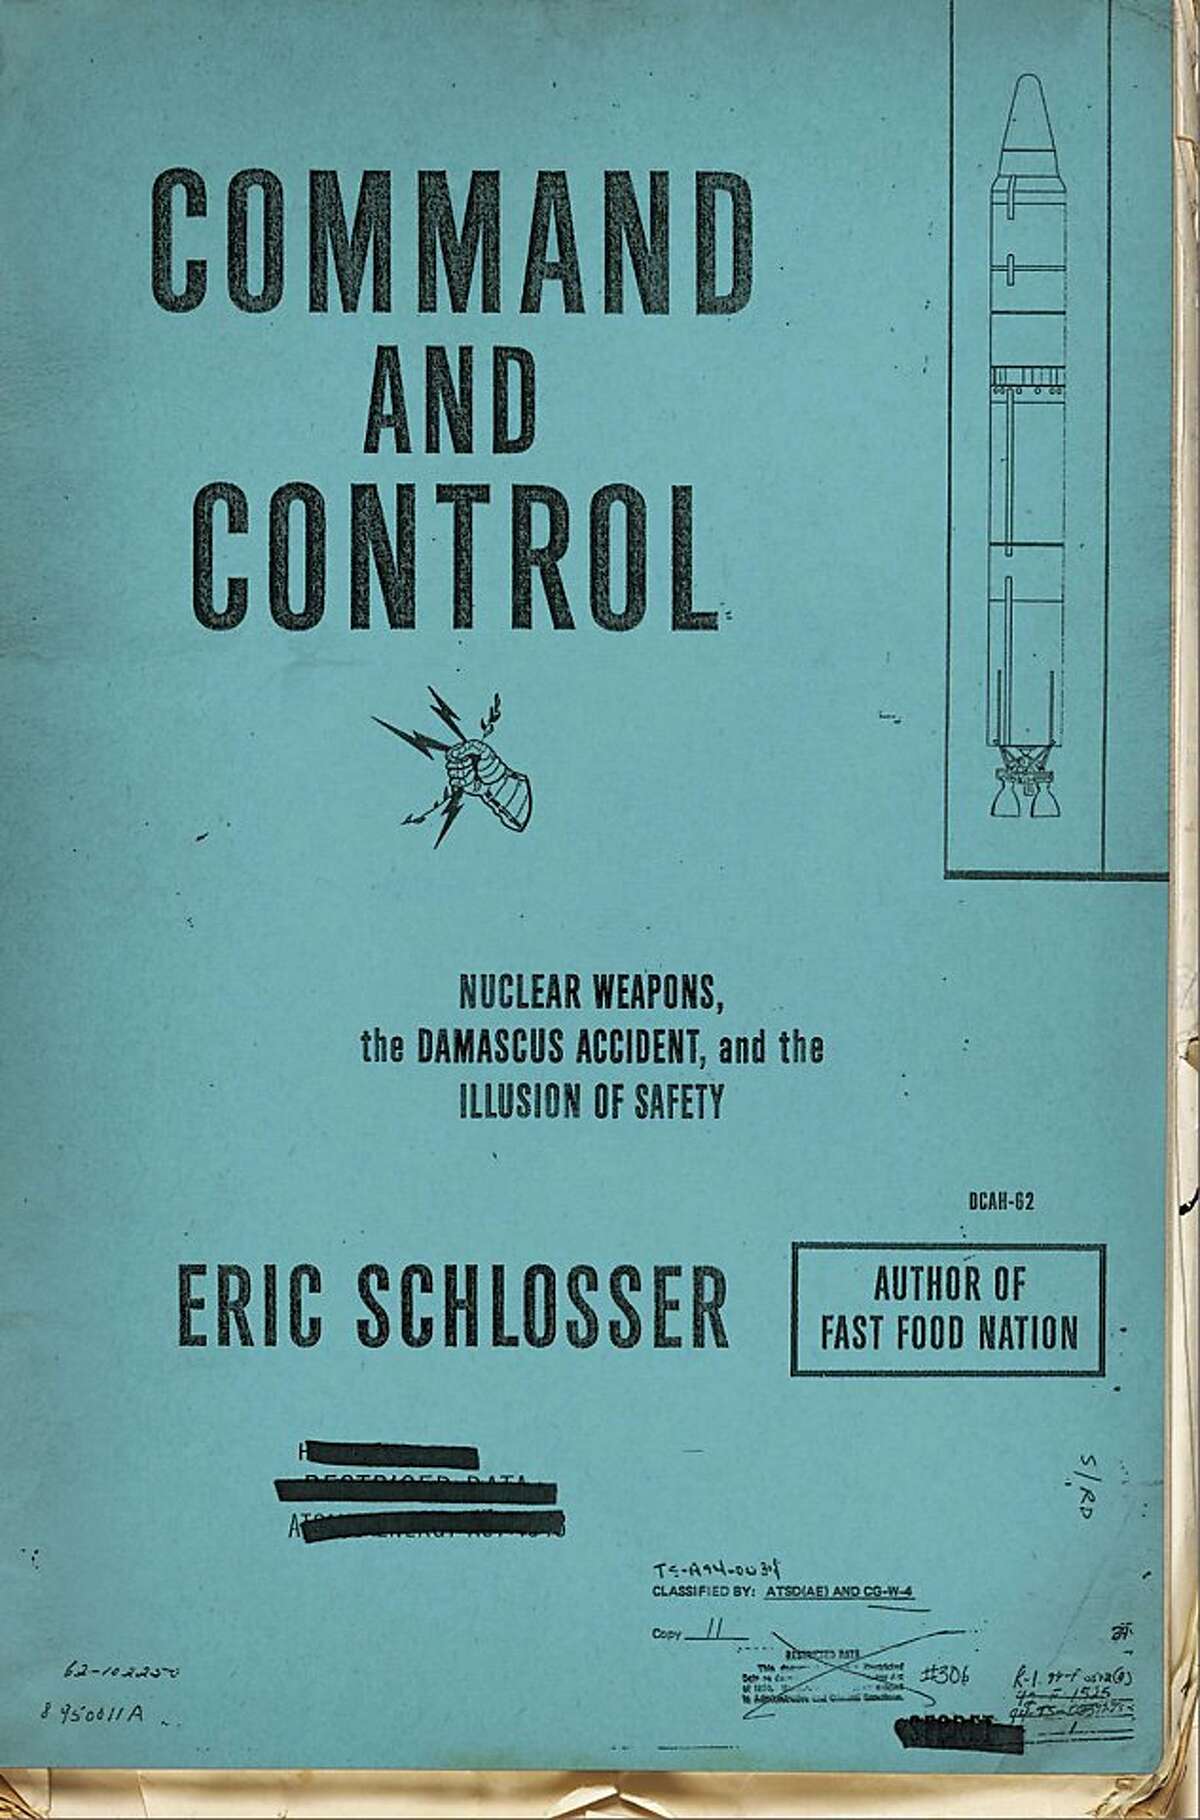 Command and Control, by Eric Schlosser